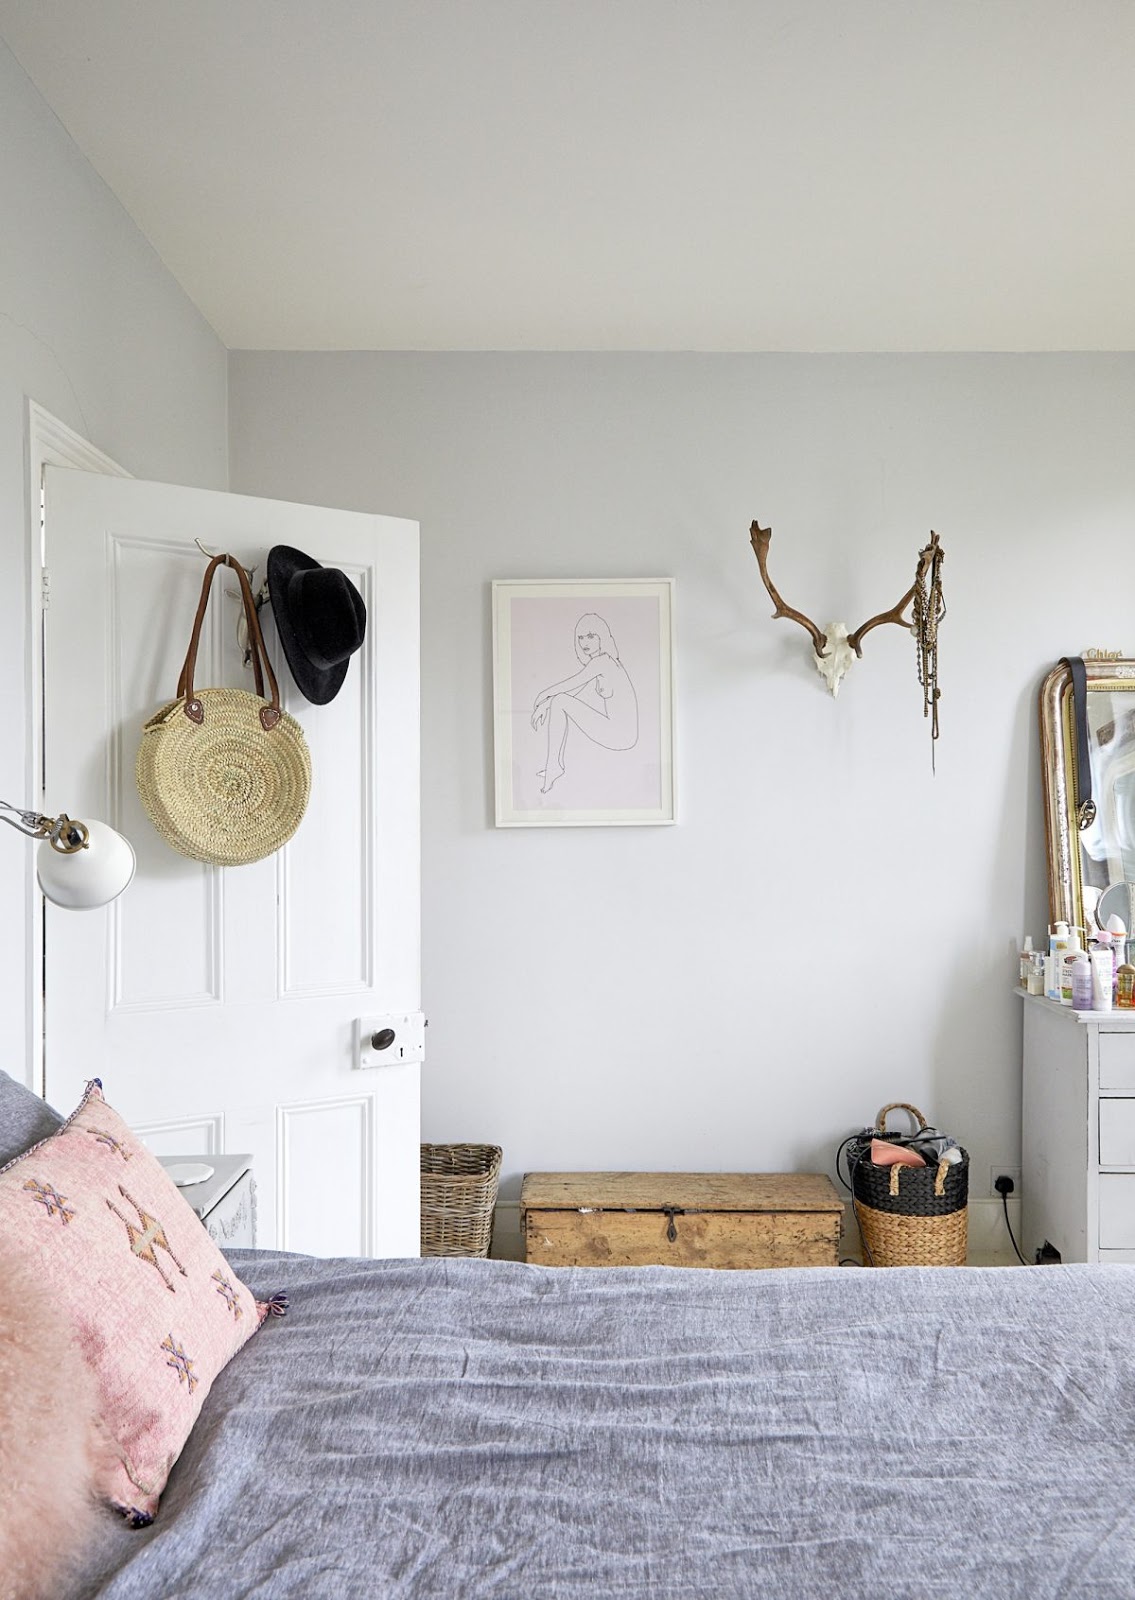 Home Sweet Home: A Cheerful and Happy Space